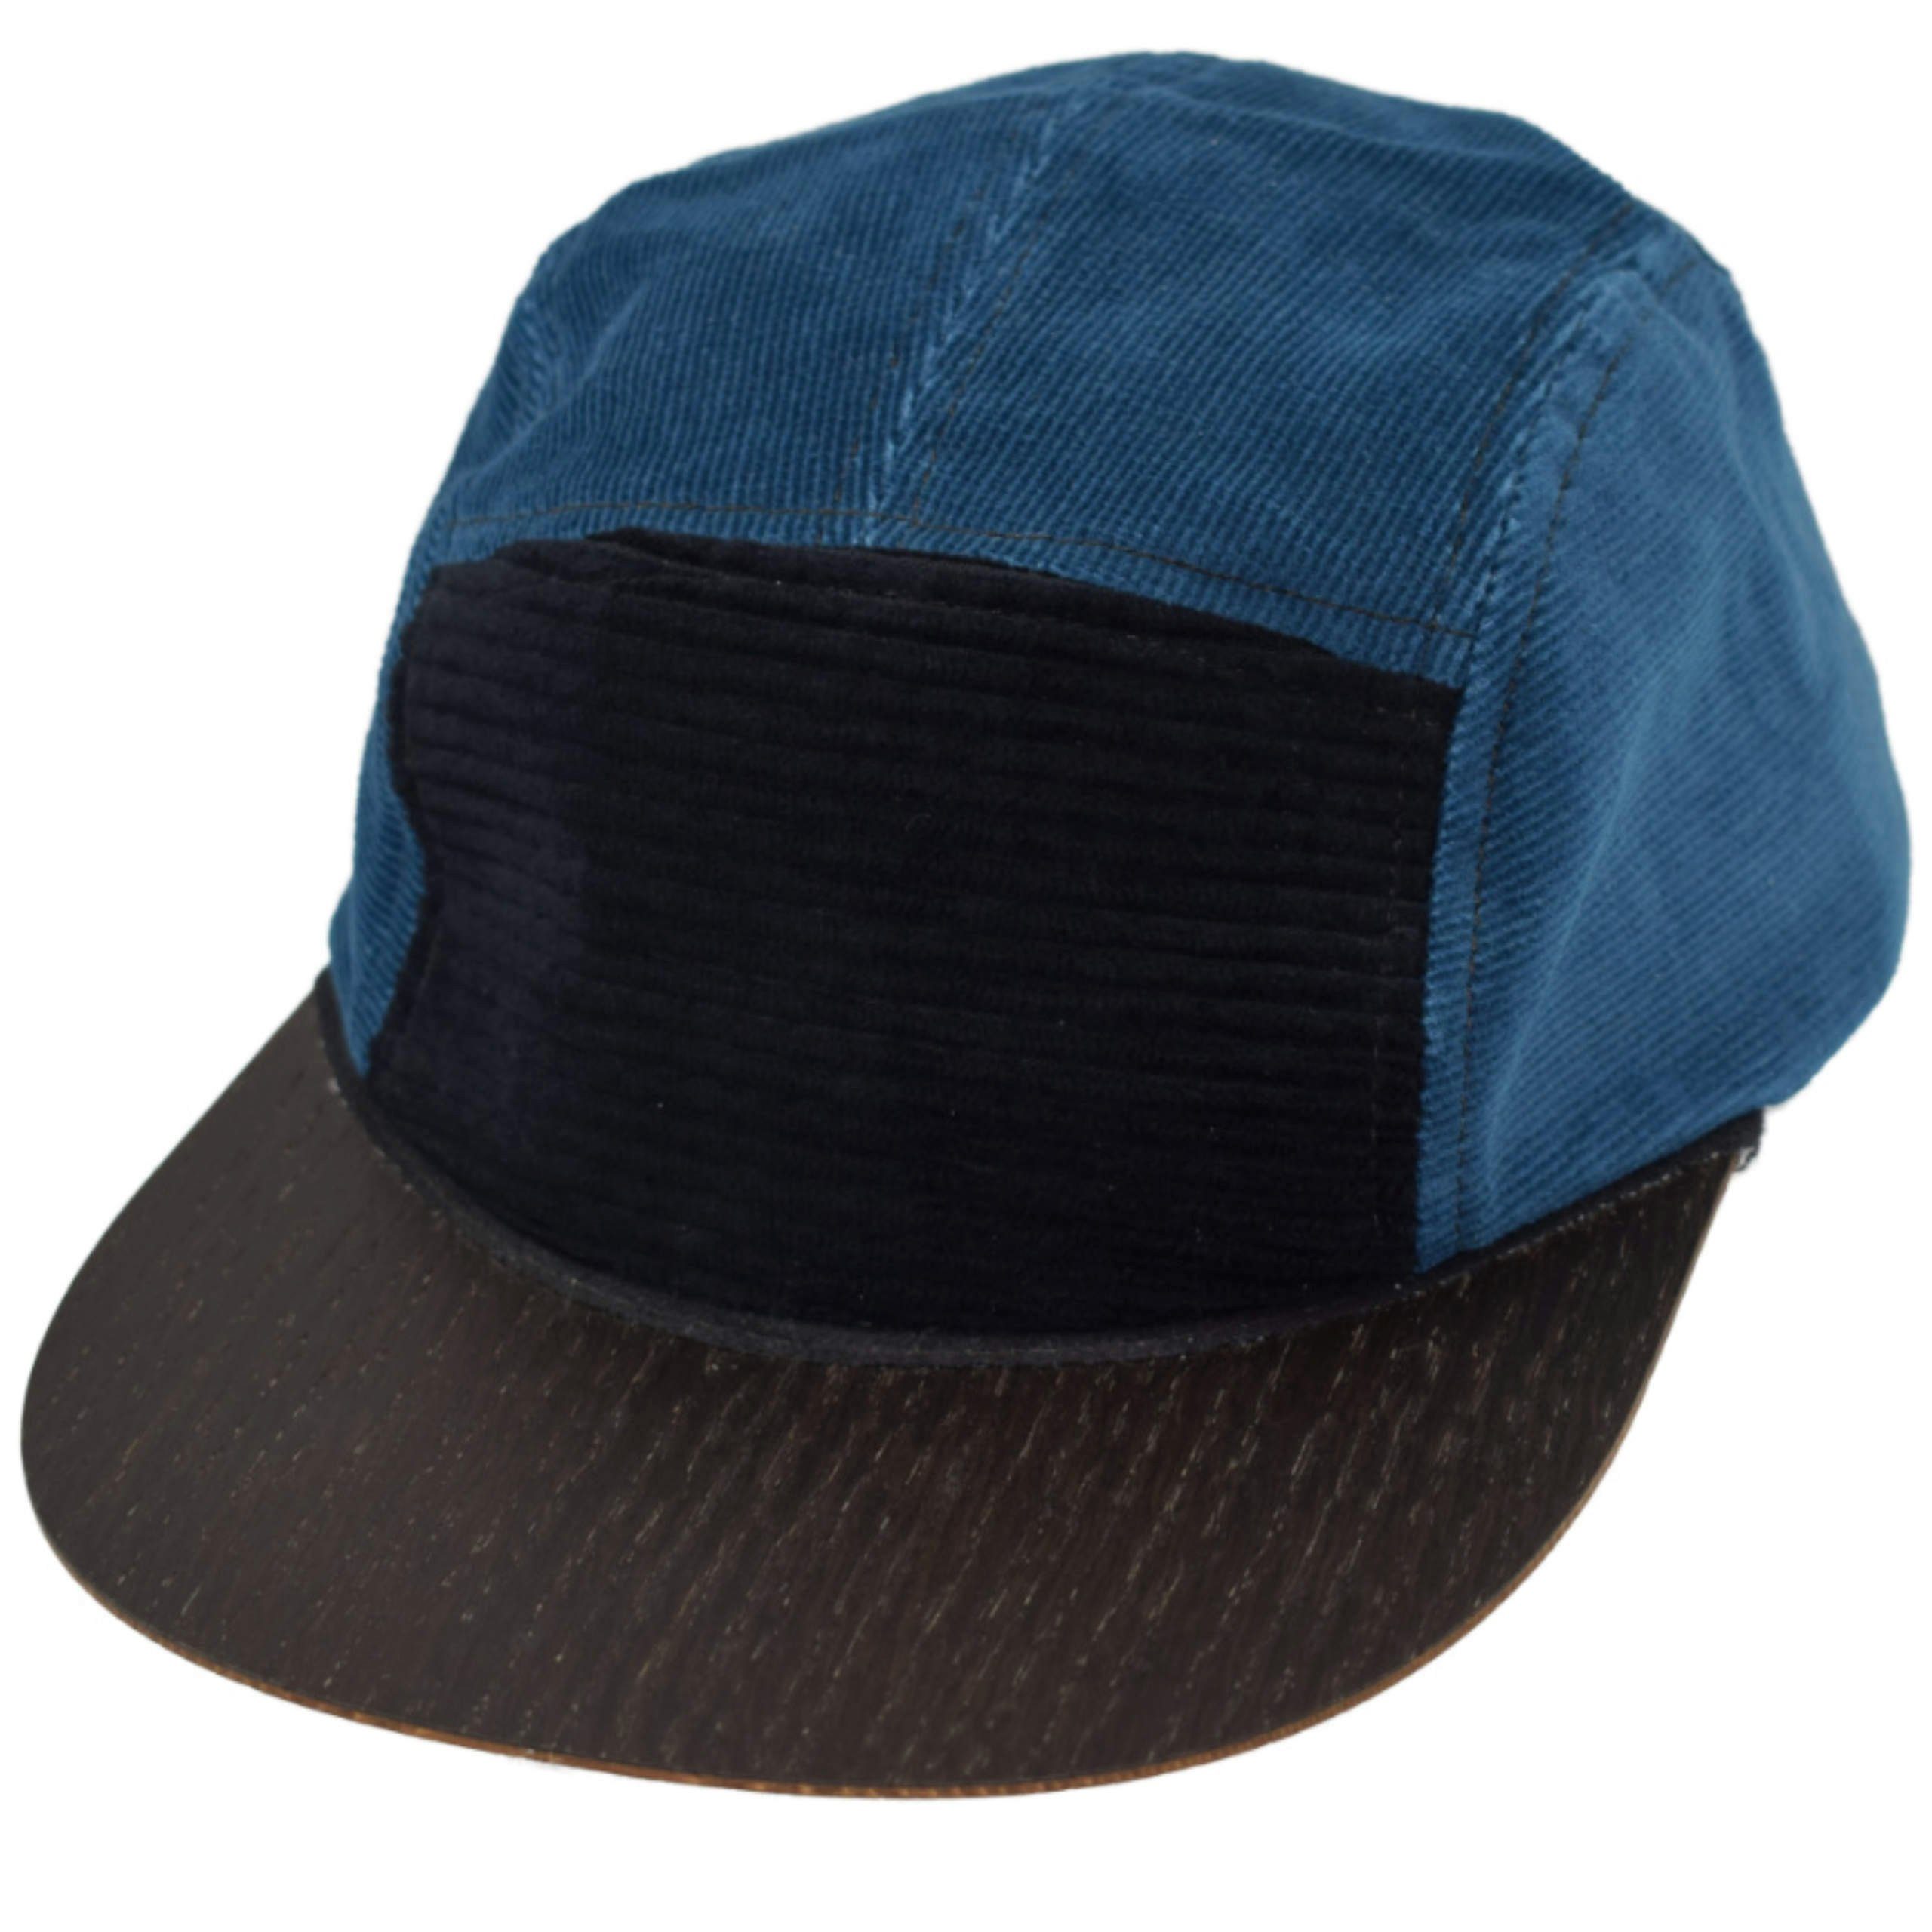 Cap Holzschild mit Cord Made Cap Lou-i Holzschild in Blau Snapback Germany